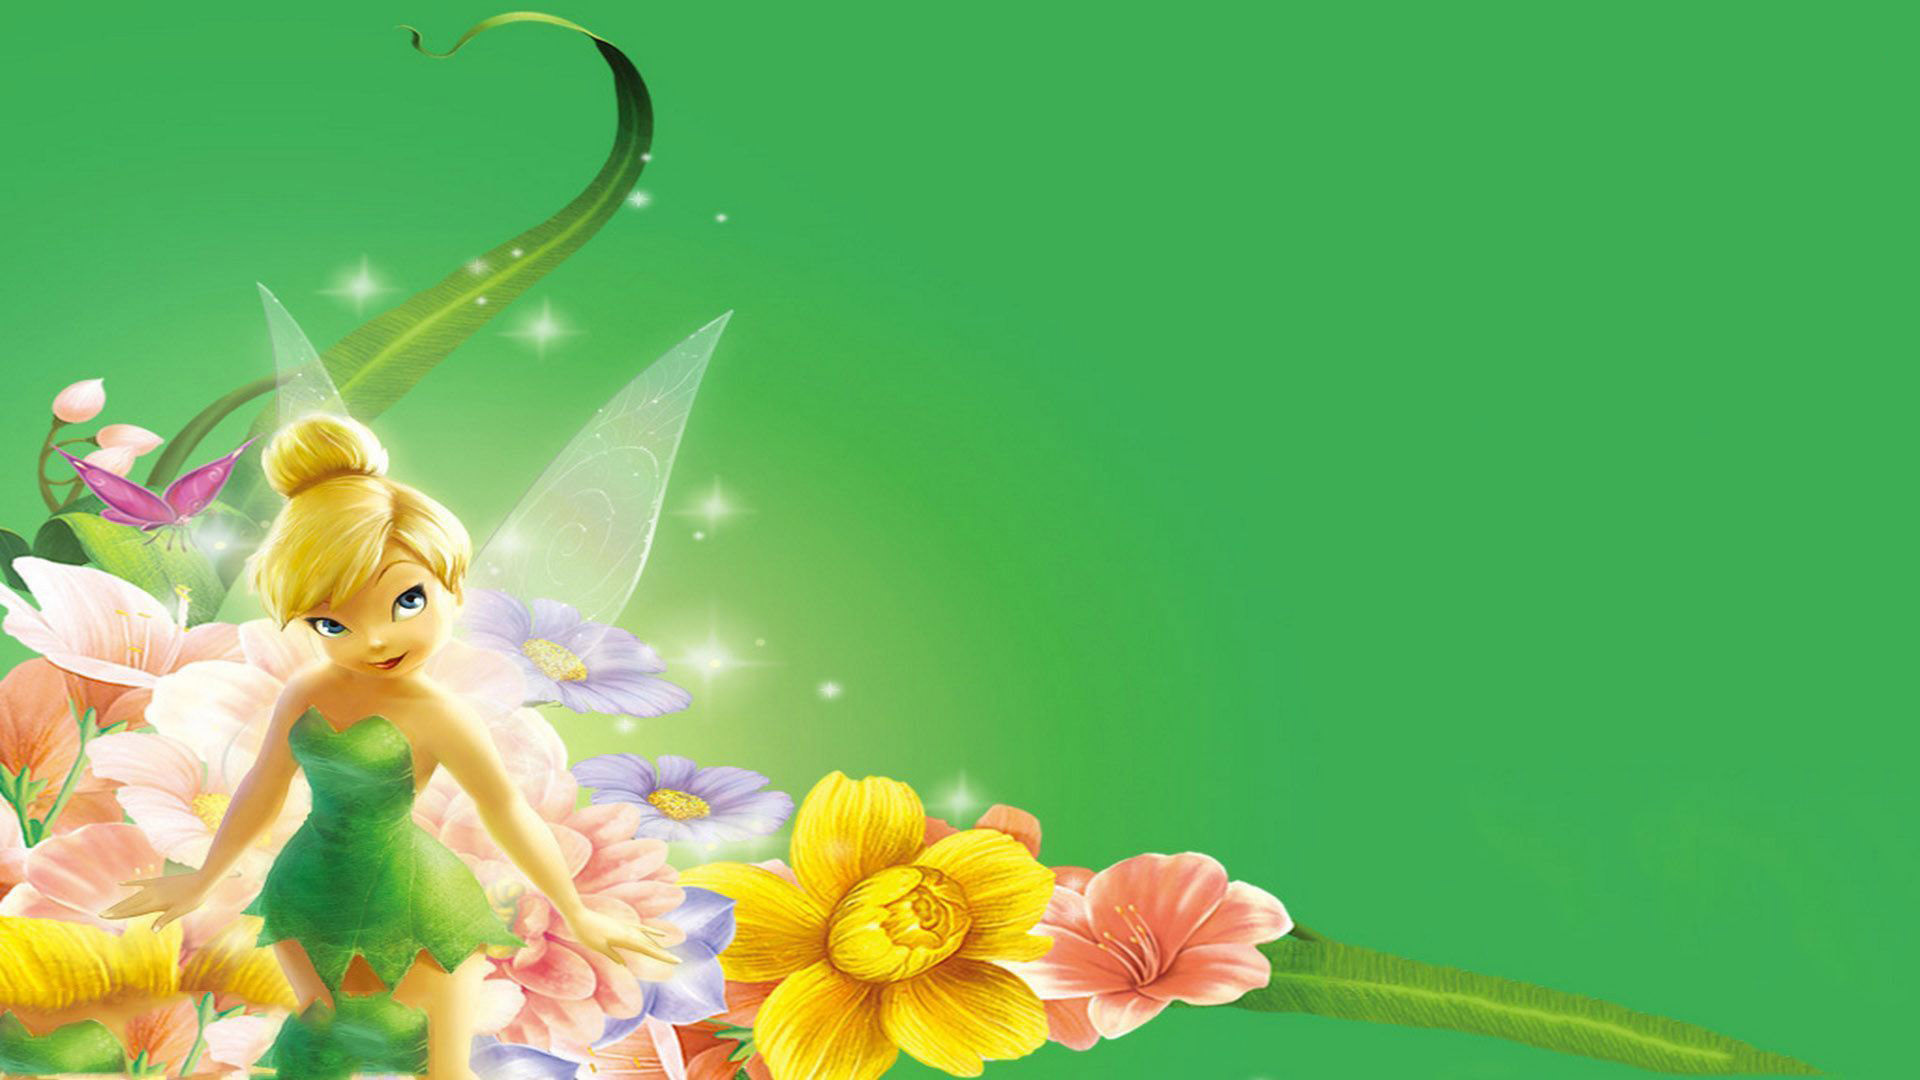 1920x1080 free hd tinkerbell pictures download full hd desktop images amazing  colourful 4k download wallpapers cool colours 1920Ã1080 Wallpaper HD